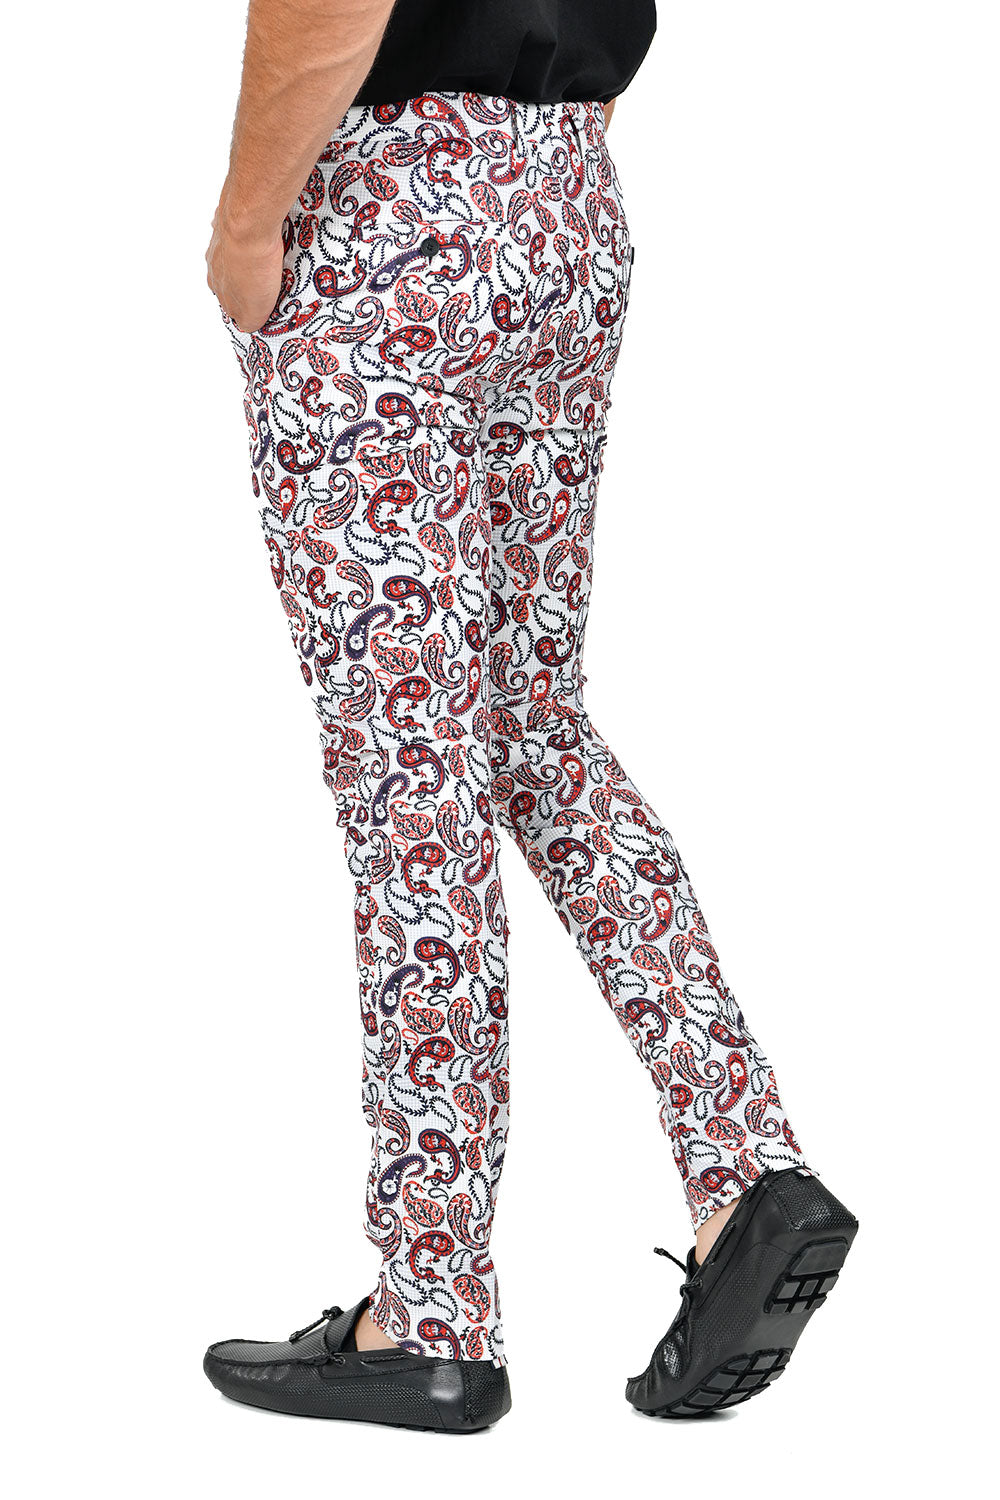 BARABAS Men's Paisley Design Classic Casual Chino Pants CP113 White Red